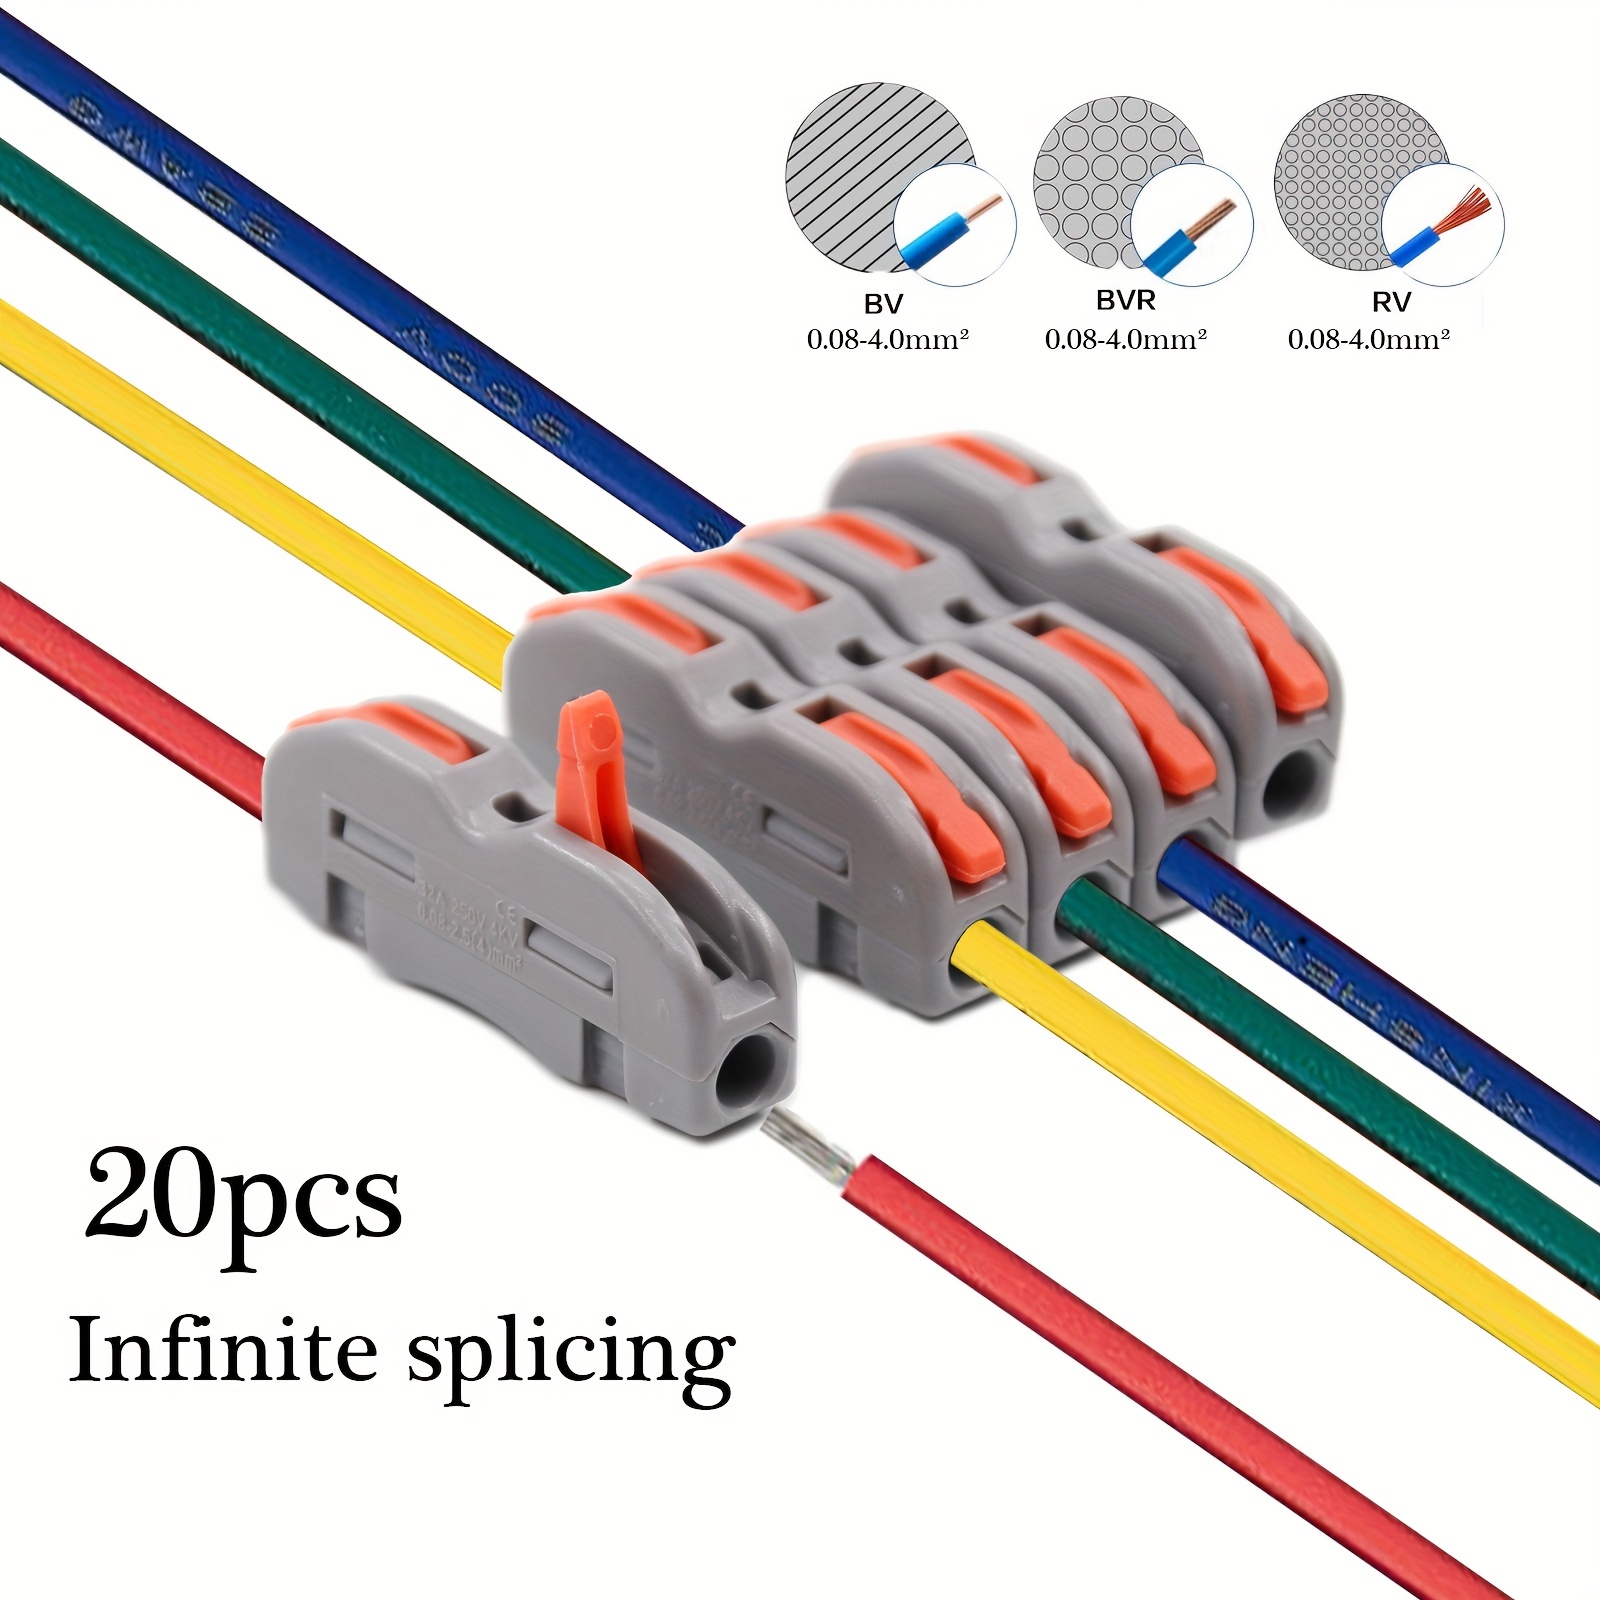 20pcs Lever Nut Wire Connector Mini Electrical Insulated Terminal Blocks  For Quick Connection Of 28 12